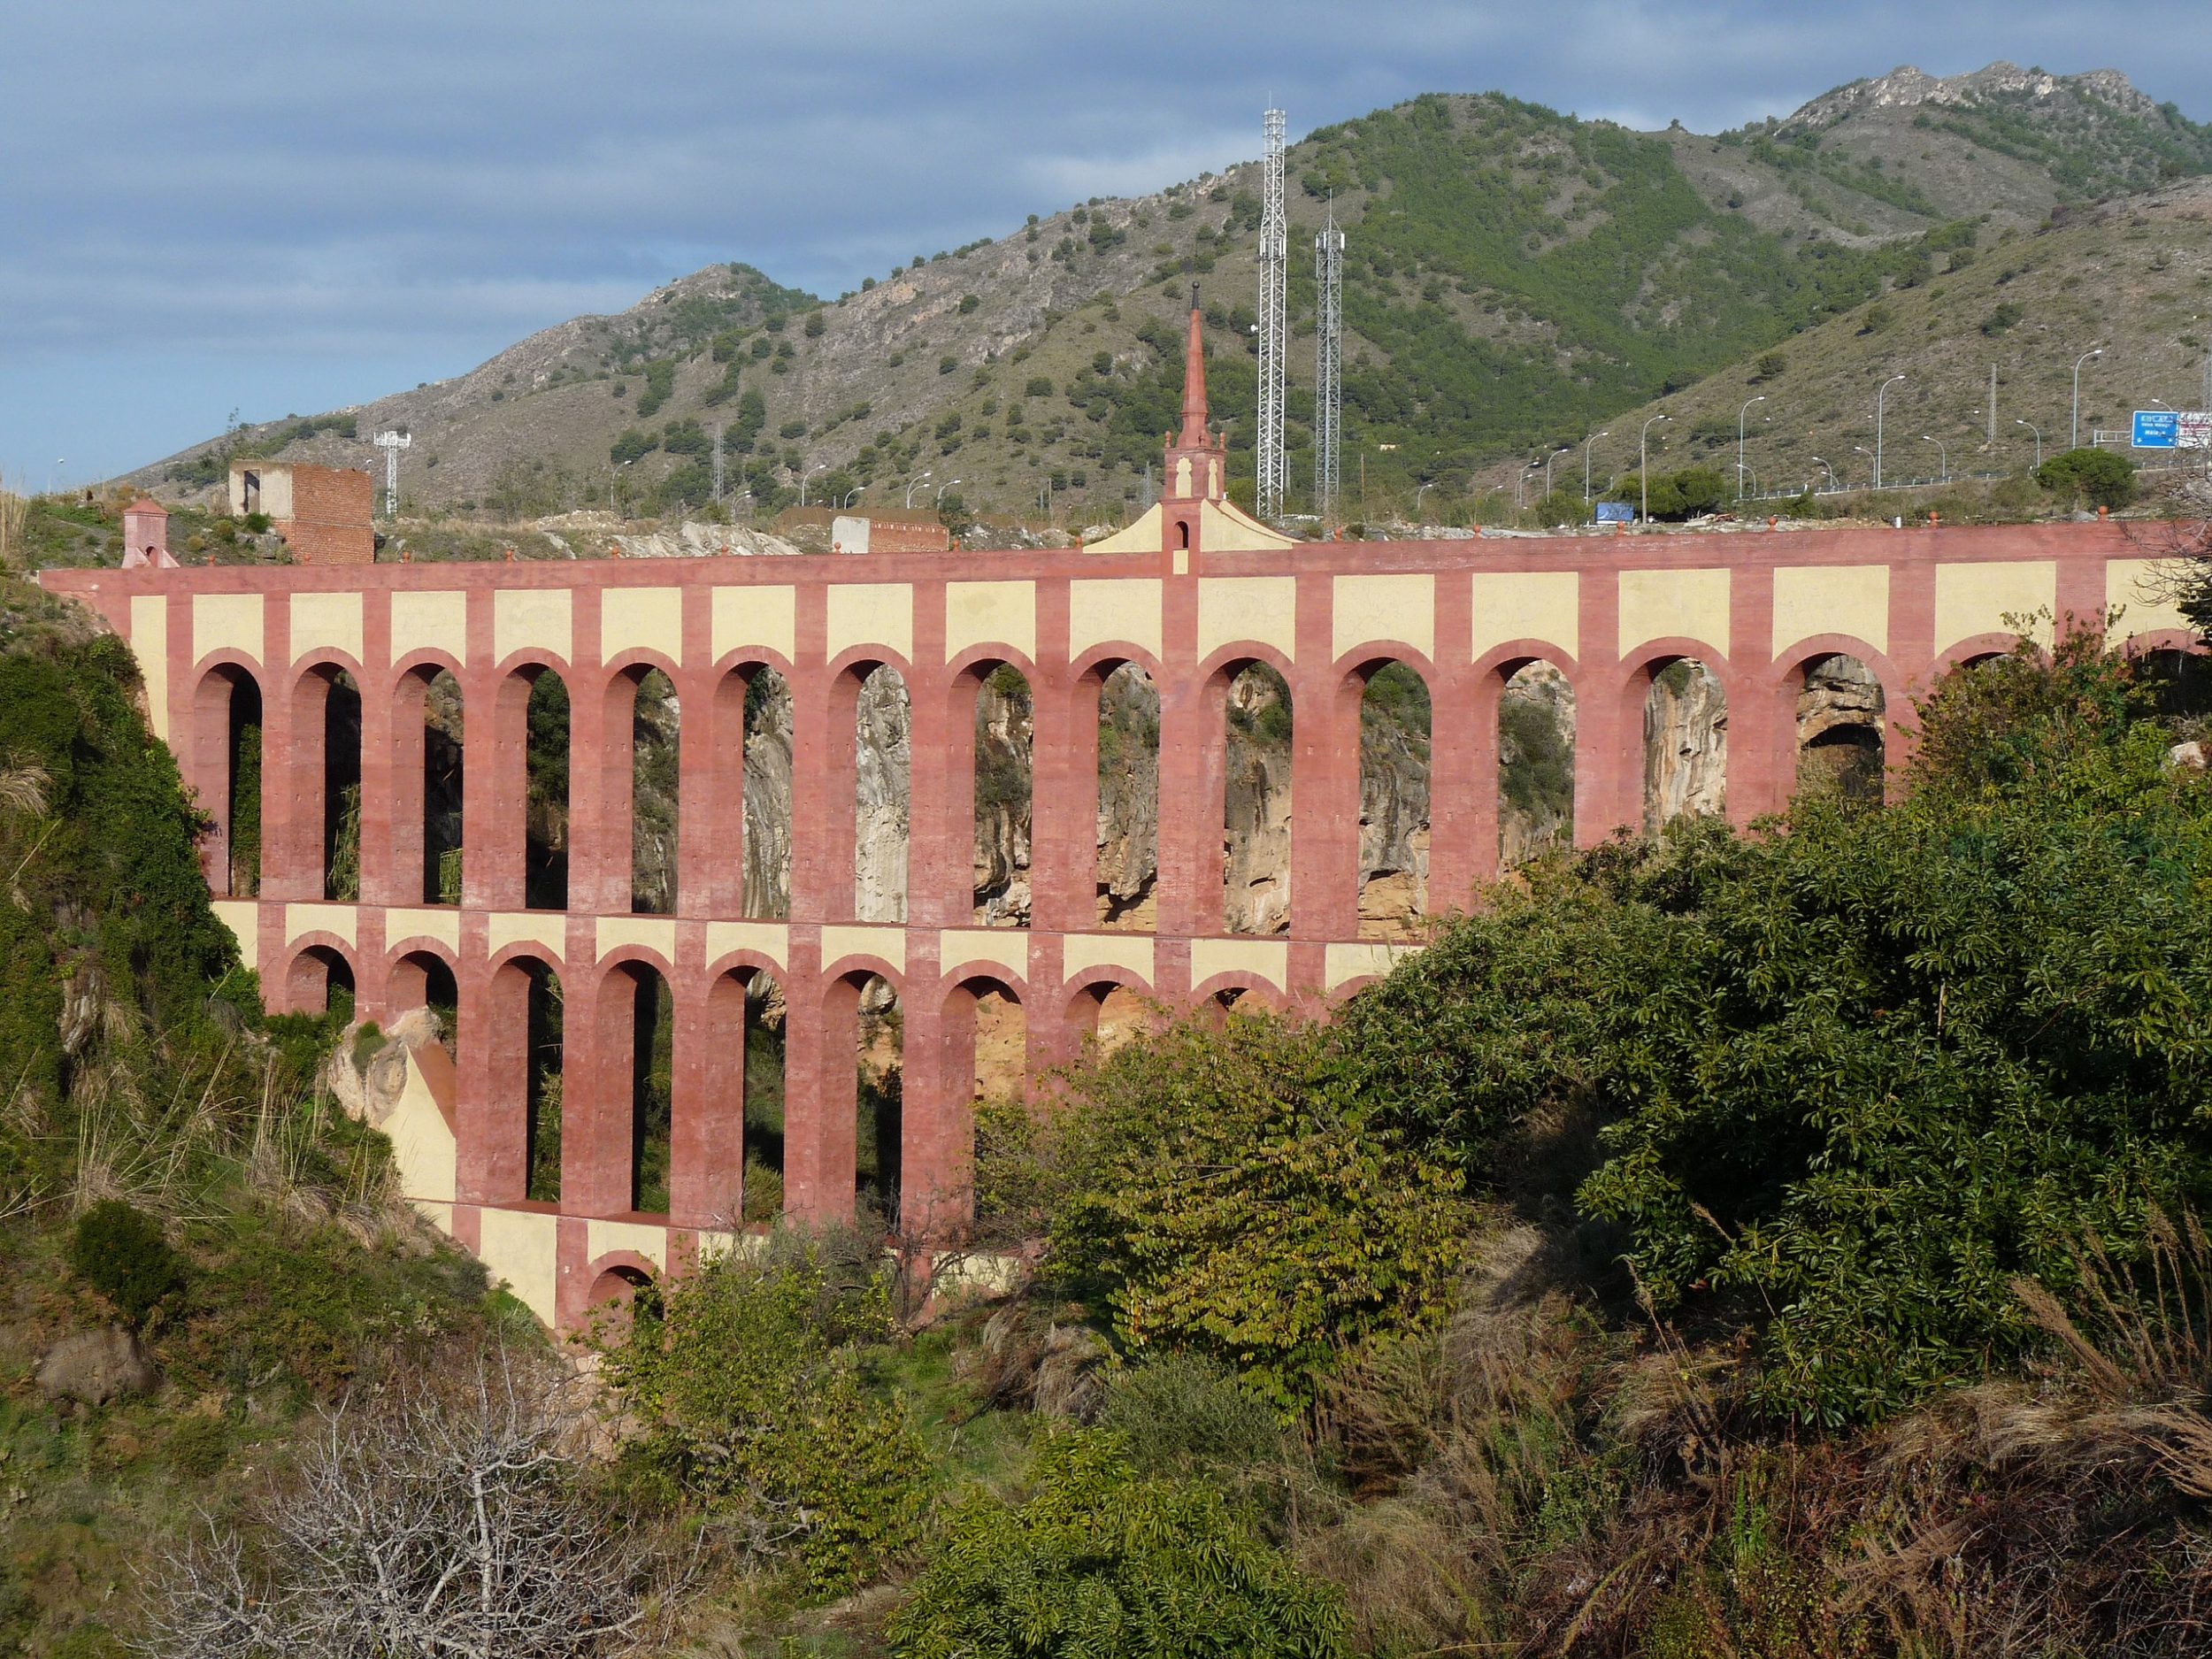 Long stay Nerja old aqueduct as an illustration